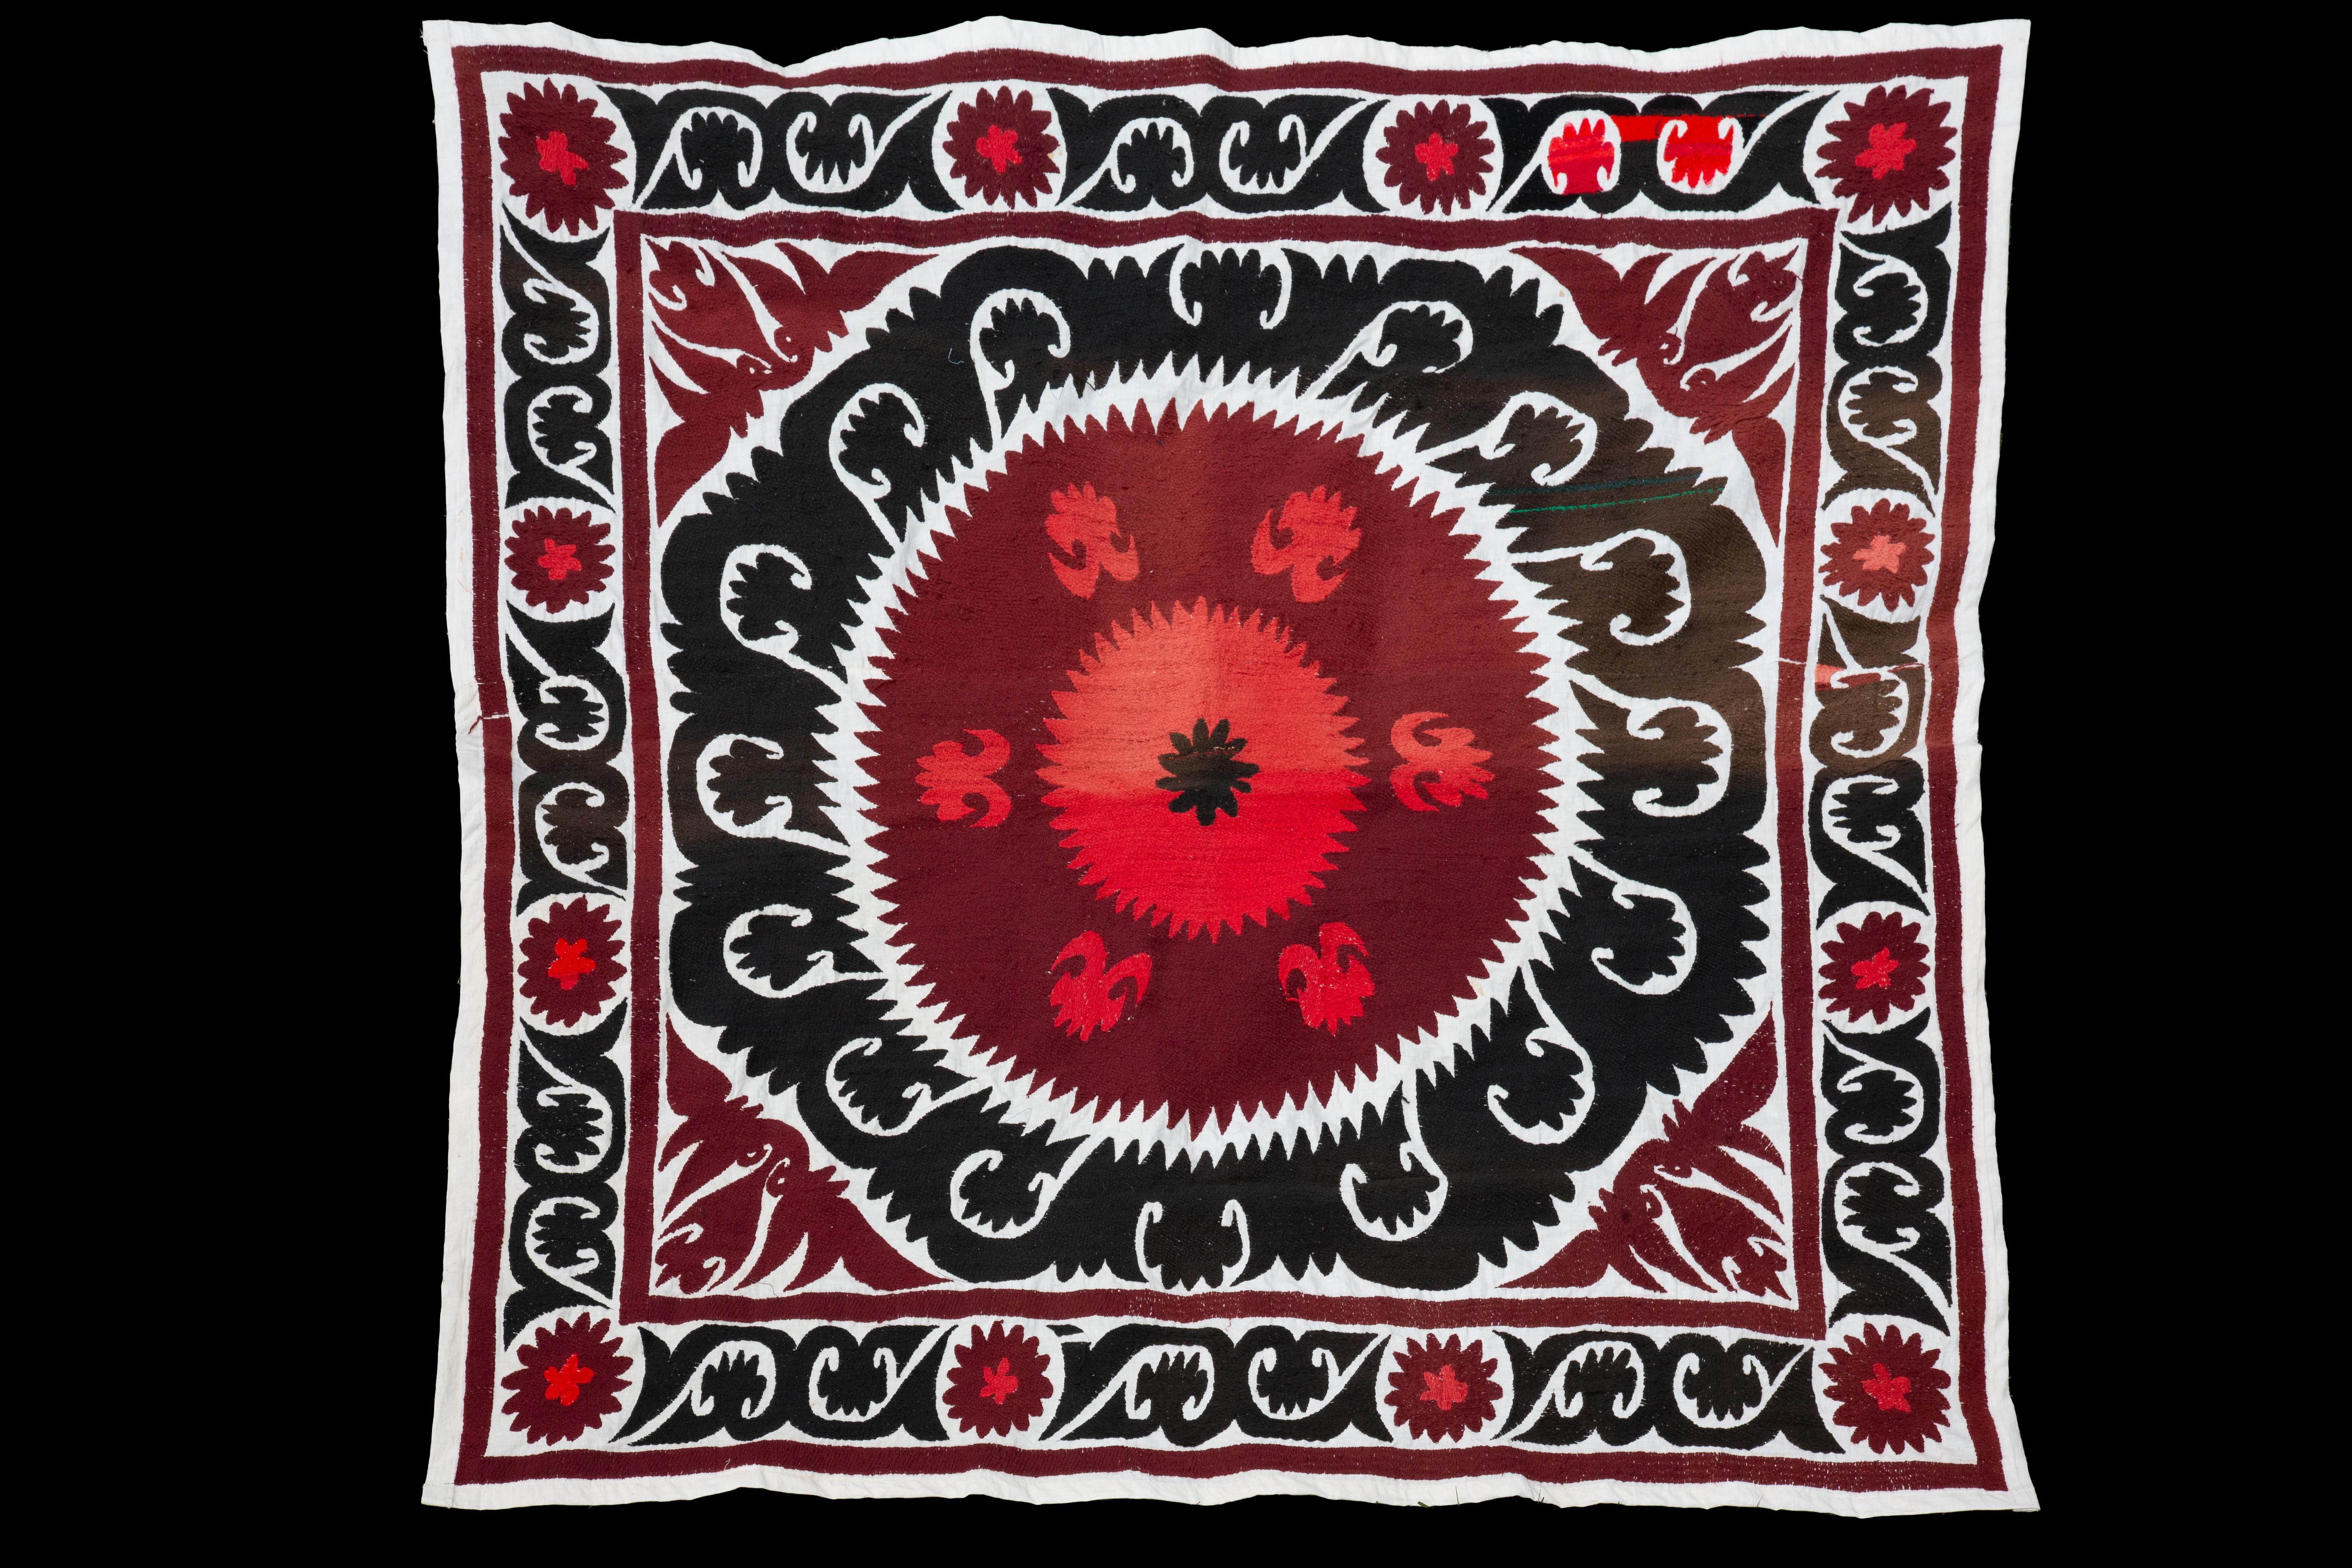 Handmade Vintage cotton suzani, red, charcoal, and black

Richly hand-embroidered vintage Uzbek suzani in iconic black and copper oranges.
Sun burst flowers are ringed with black scrolls on natural cotton.
Cotton embroidery in tight stitches